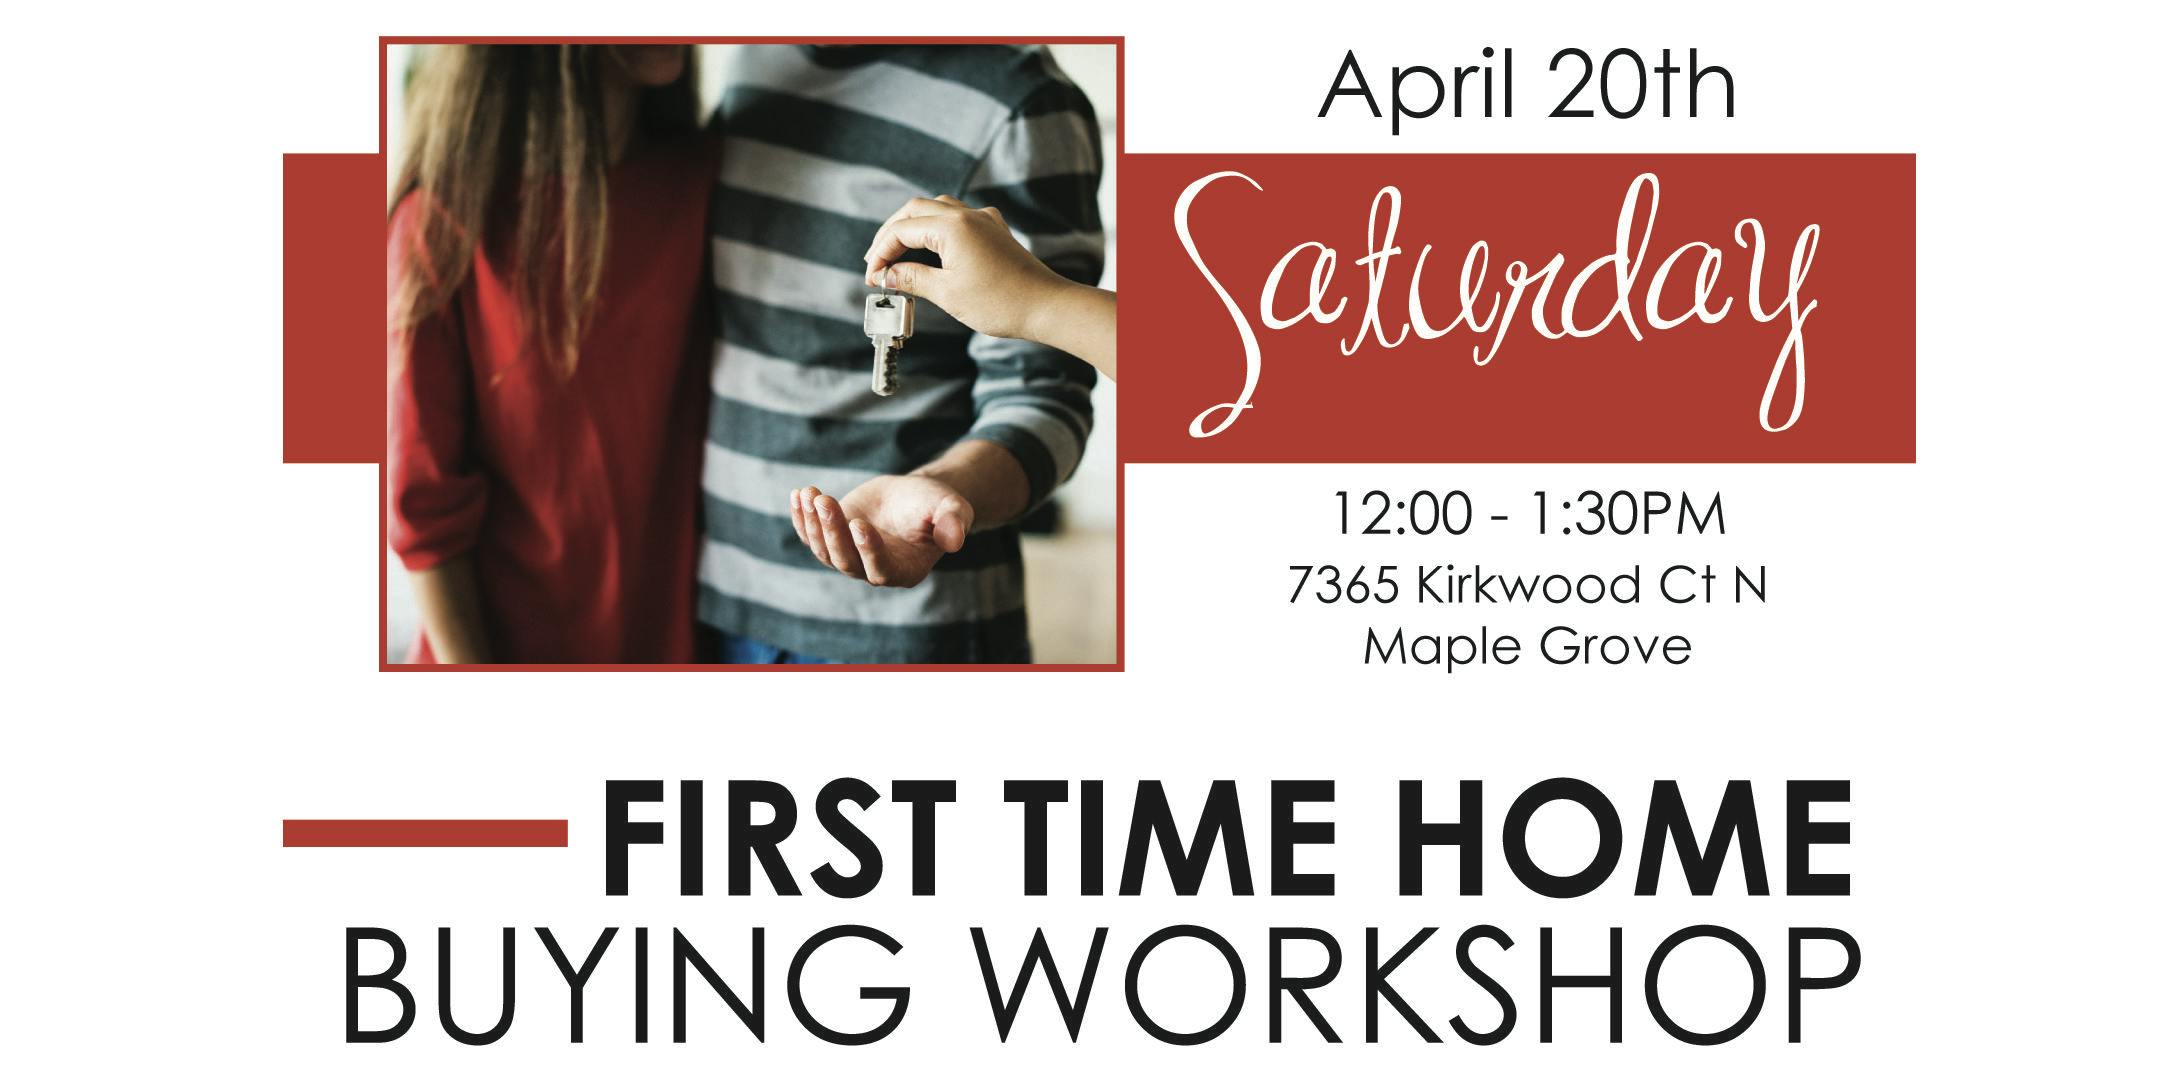 FREE First Time Home Buying Workshop